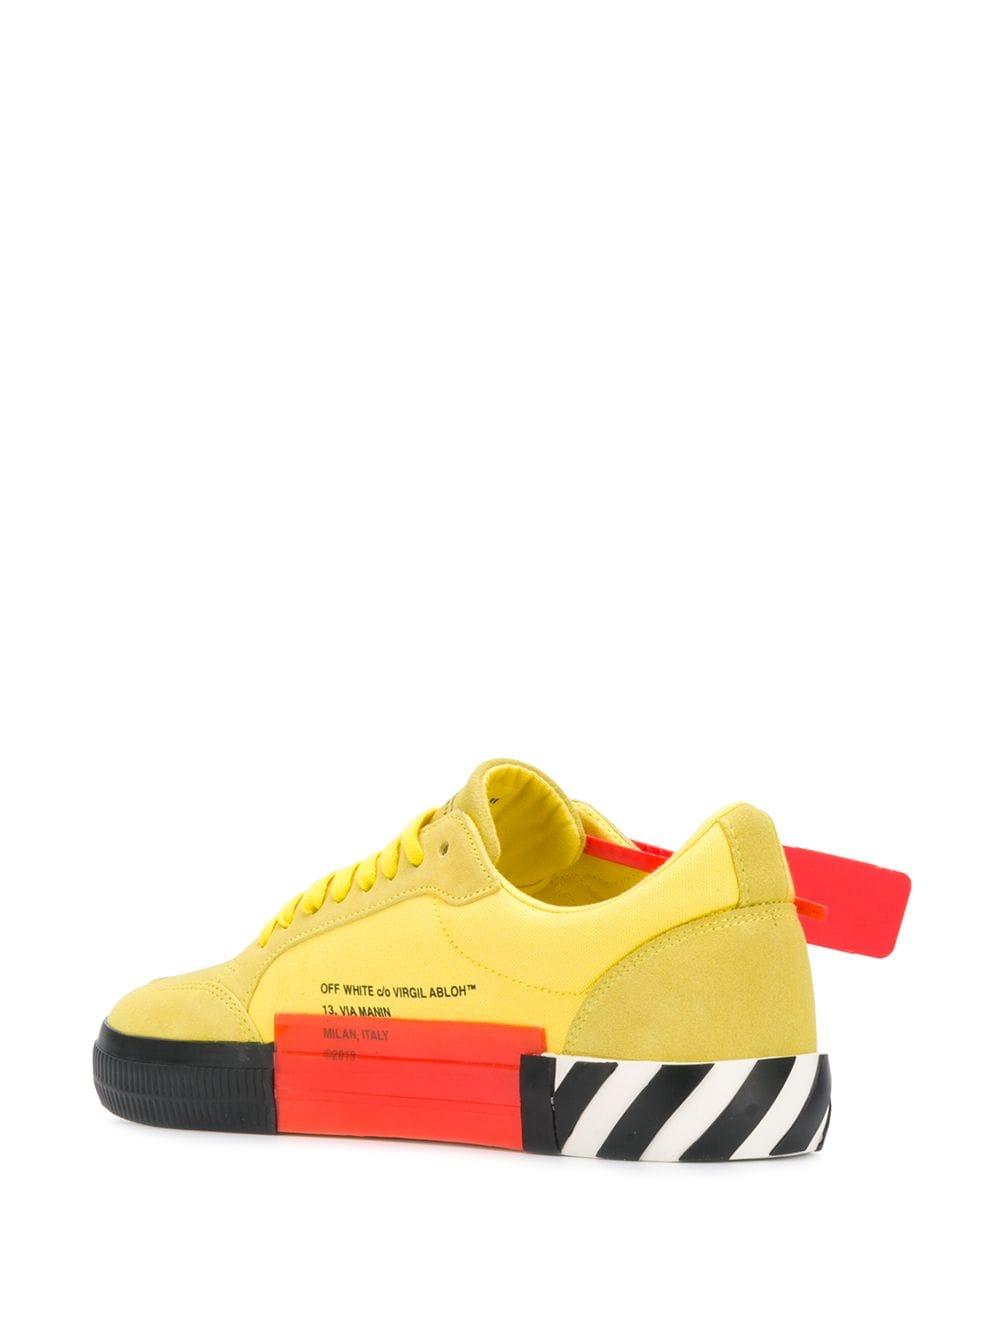 NEW OFF-WHITE C/O VIRGIL ABLOH Yellow & Red Logo Gloves Size 10 $420